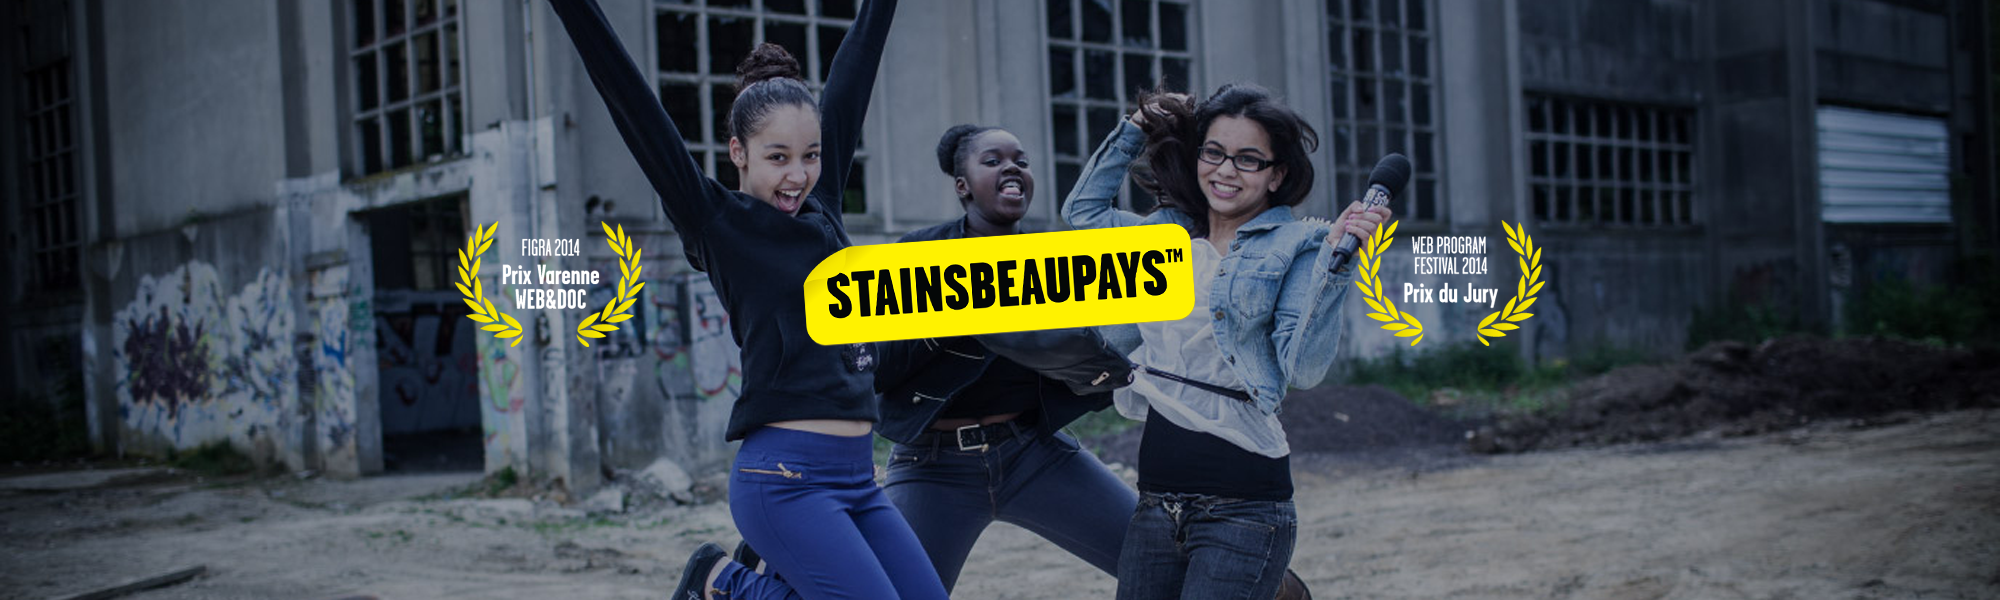 stainsbeaupays